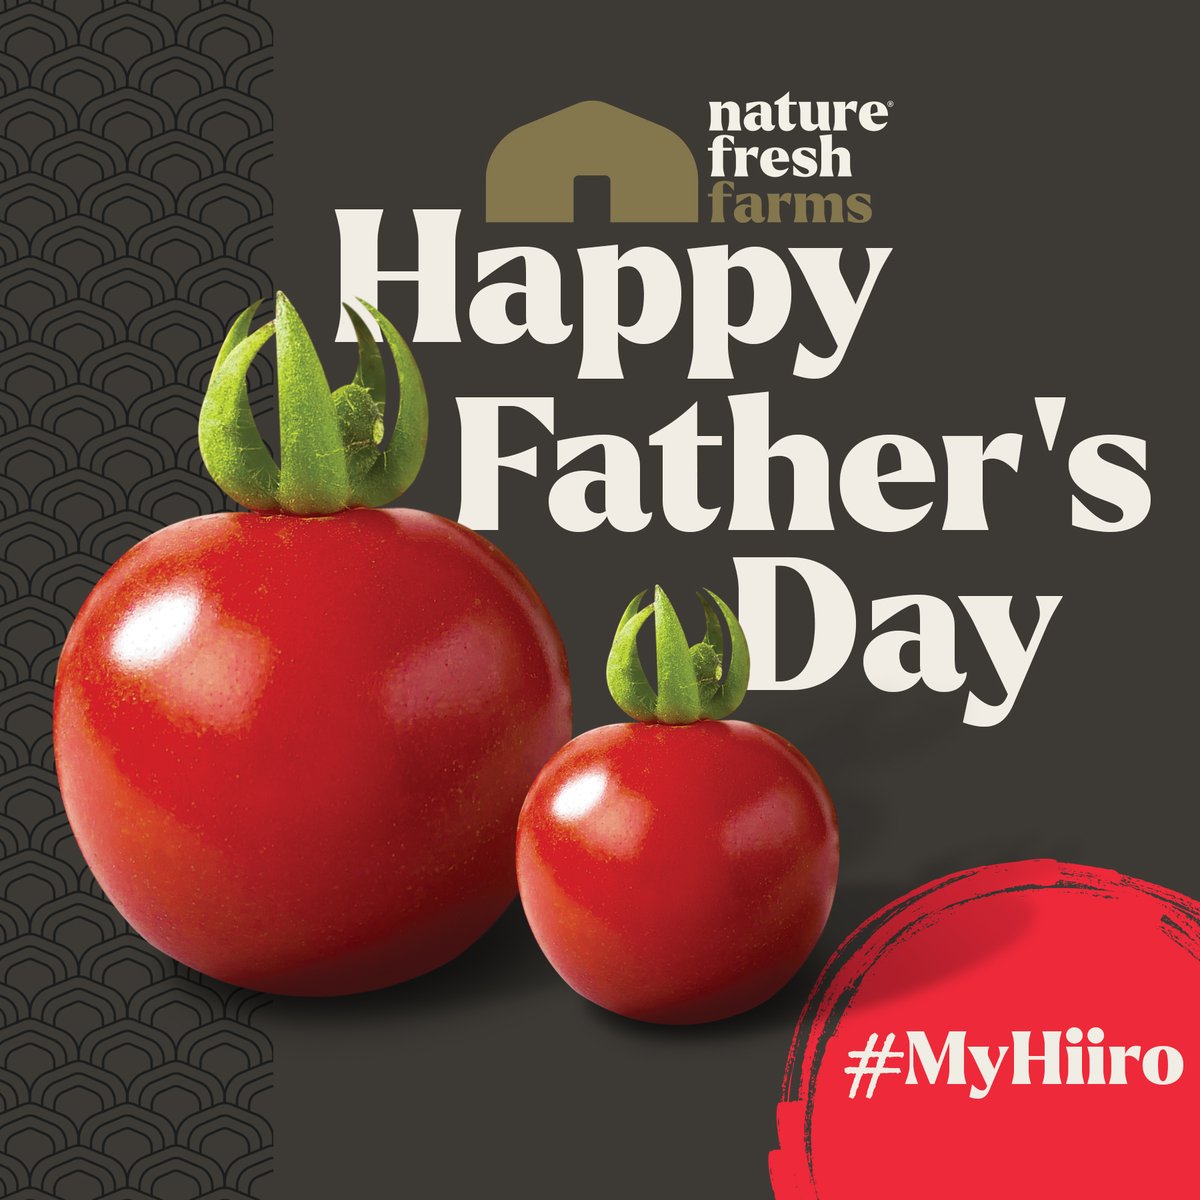 Happy Father’s Day to all the hardworking father figures in our lives! Let us know why your dad is your hero in the comment section using the hashtag #MyHiiro